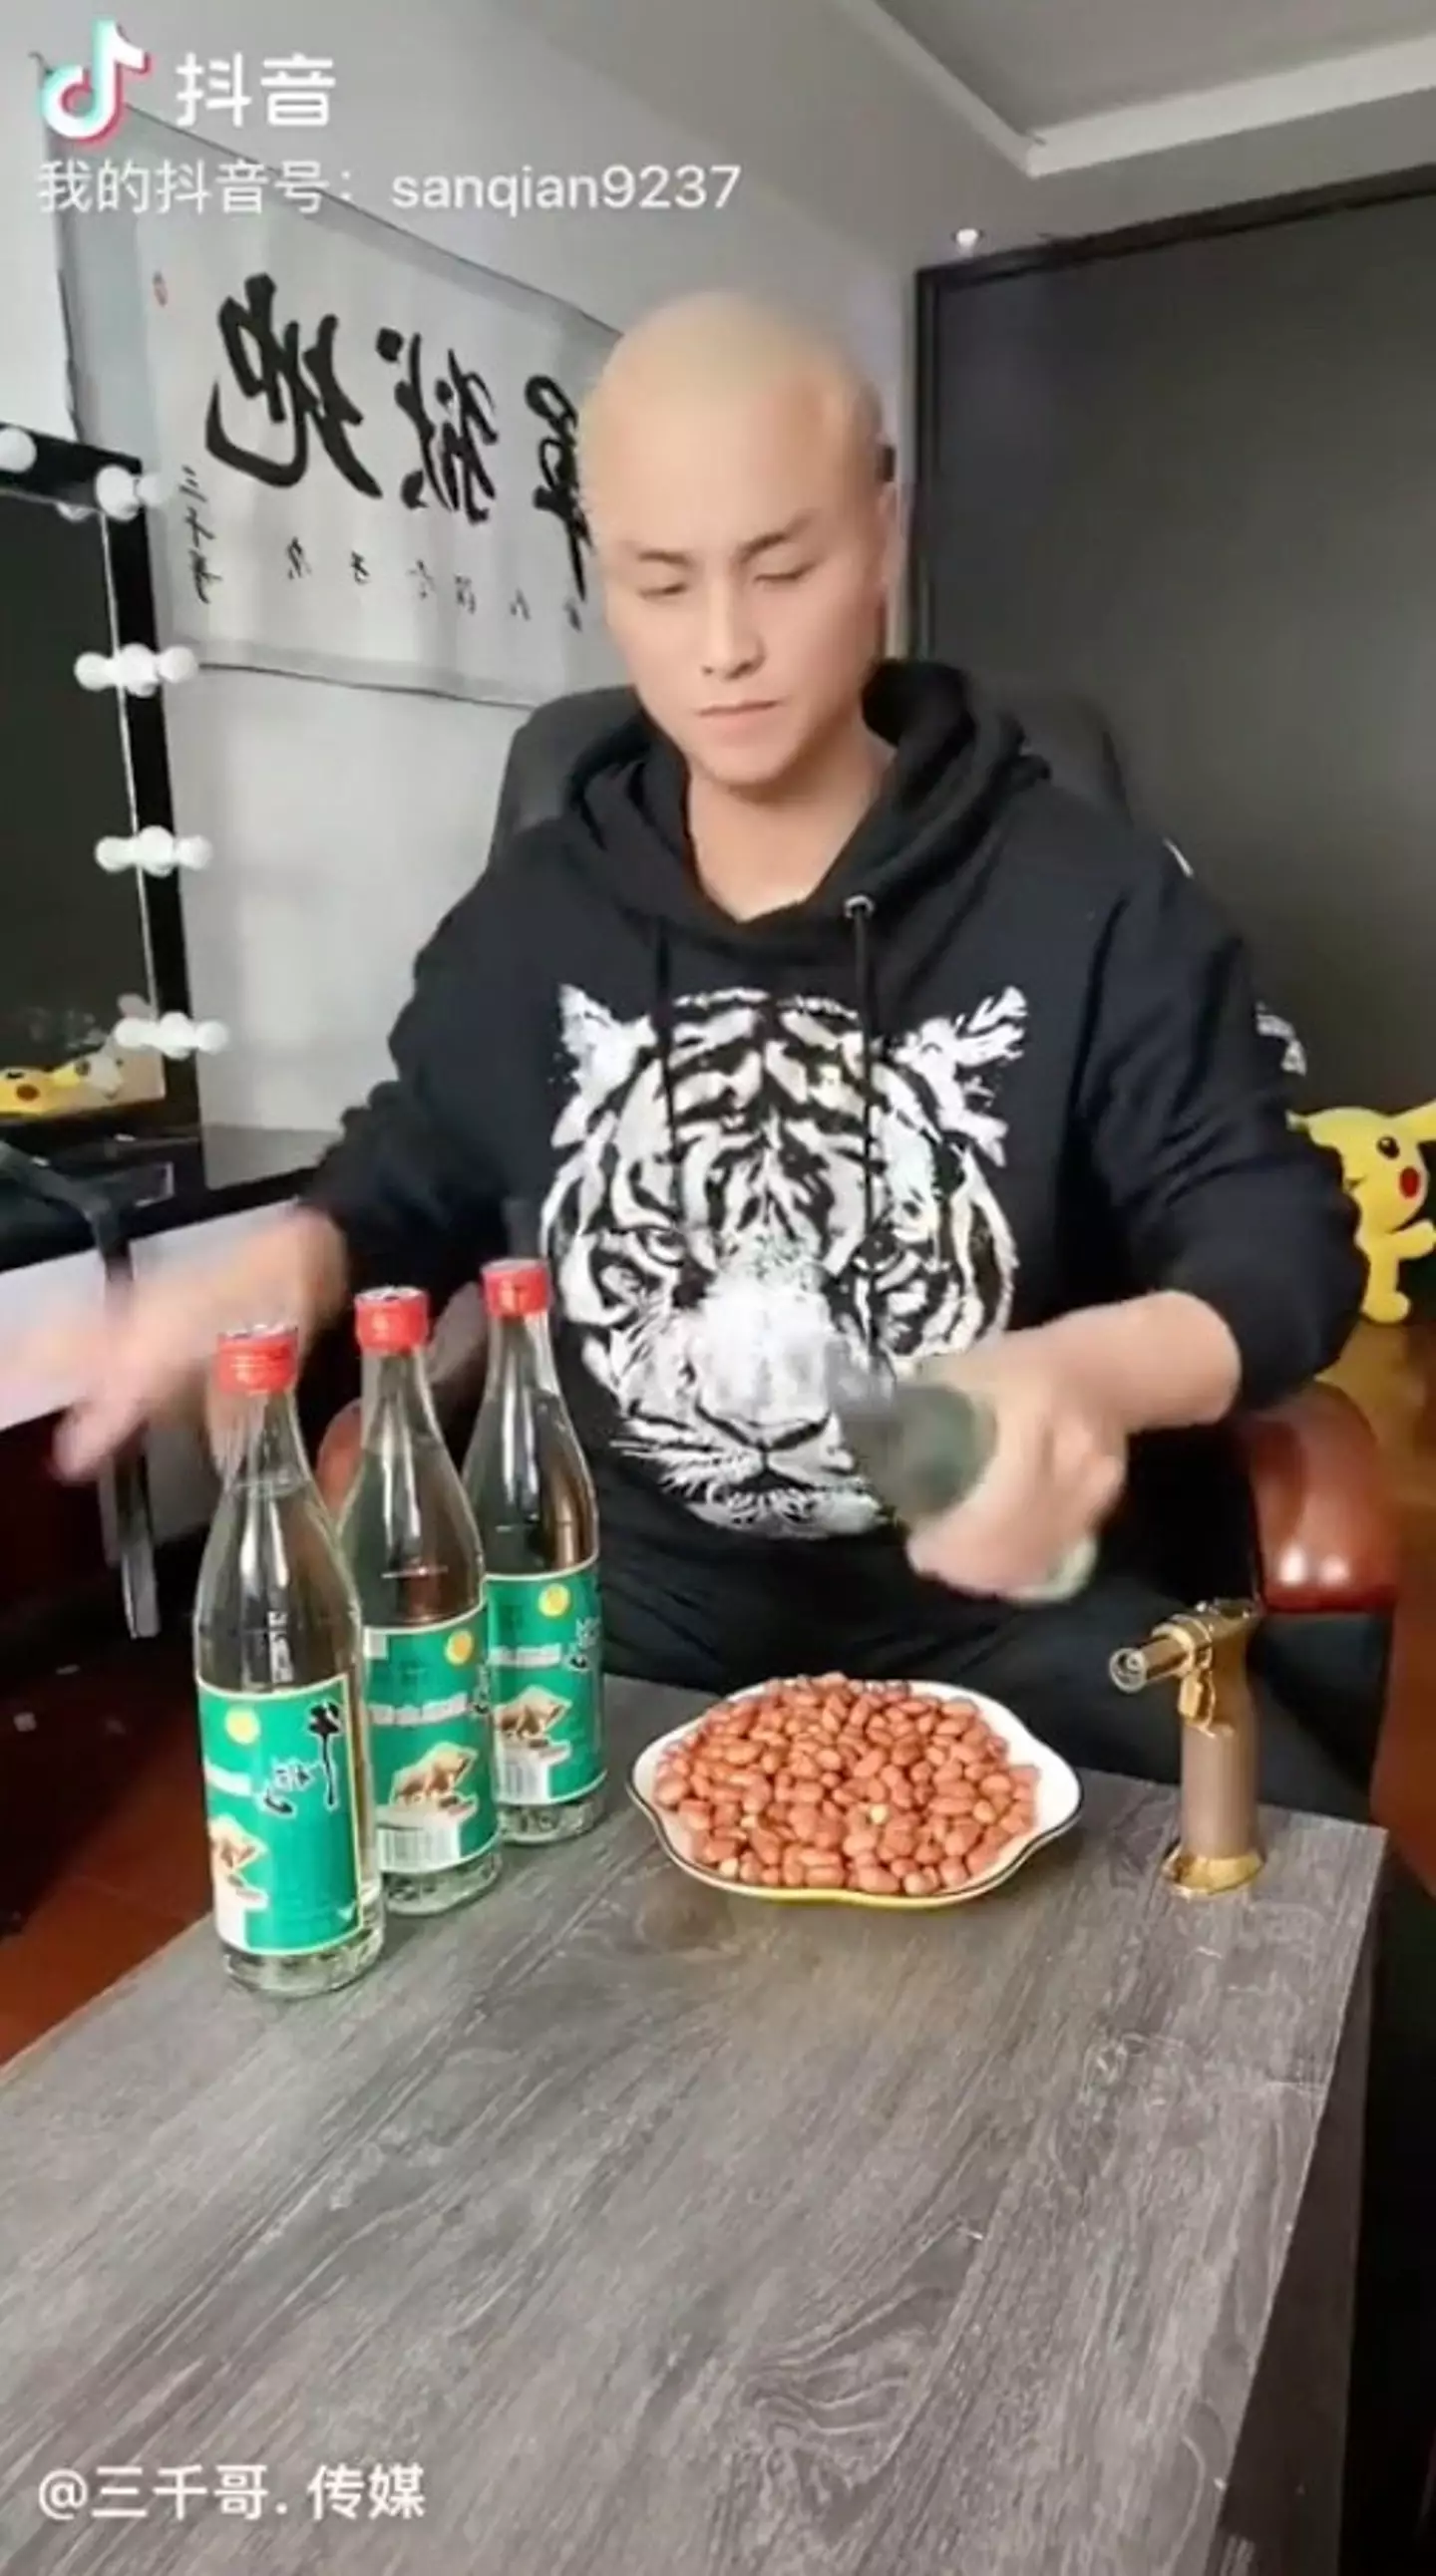 A Chinese content creator has died shortly after attempting an online challenge which involved drinking excessive amounts of alcohol.